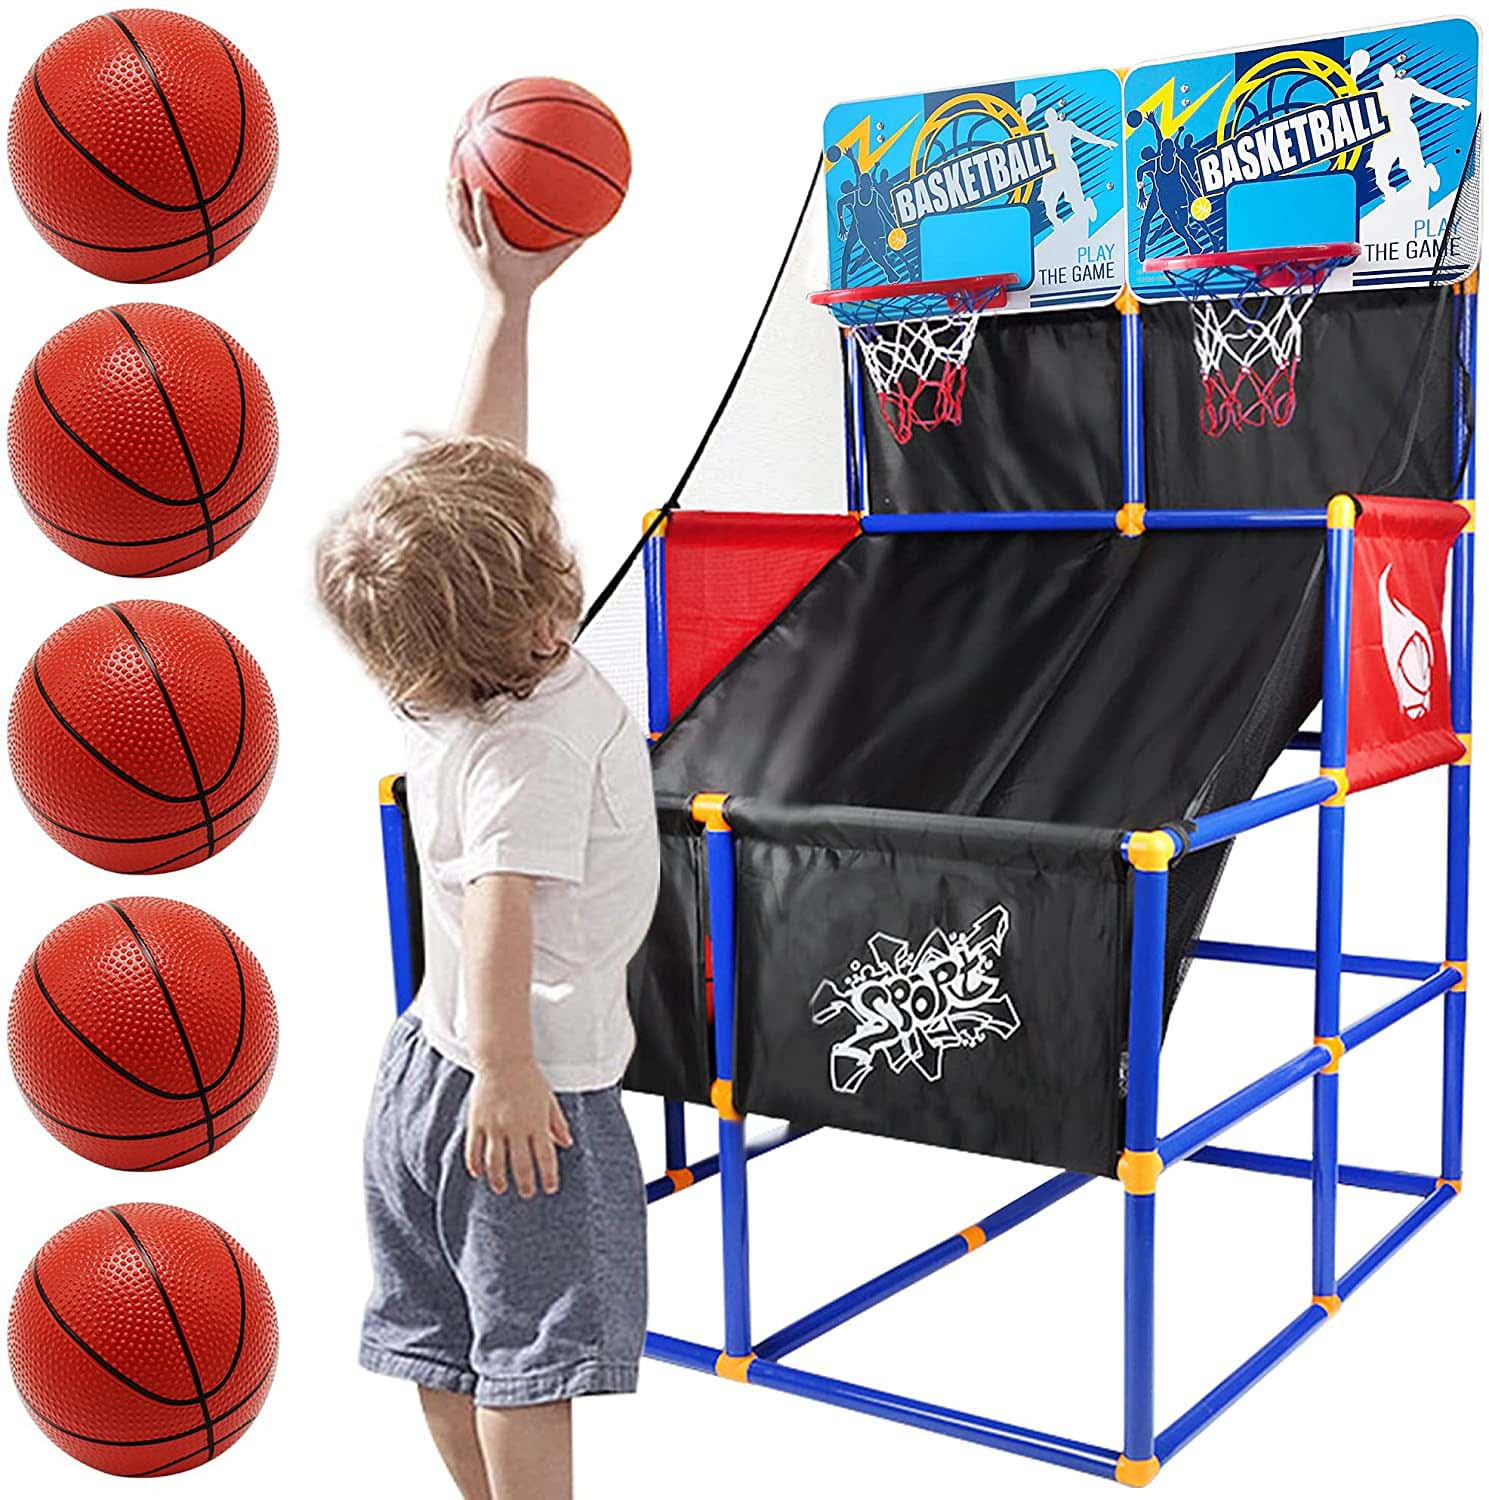 Kids Basketball Hoop Toddlers Toy for 1-3 Year Old Boy Girl Adjustable Height Ba 